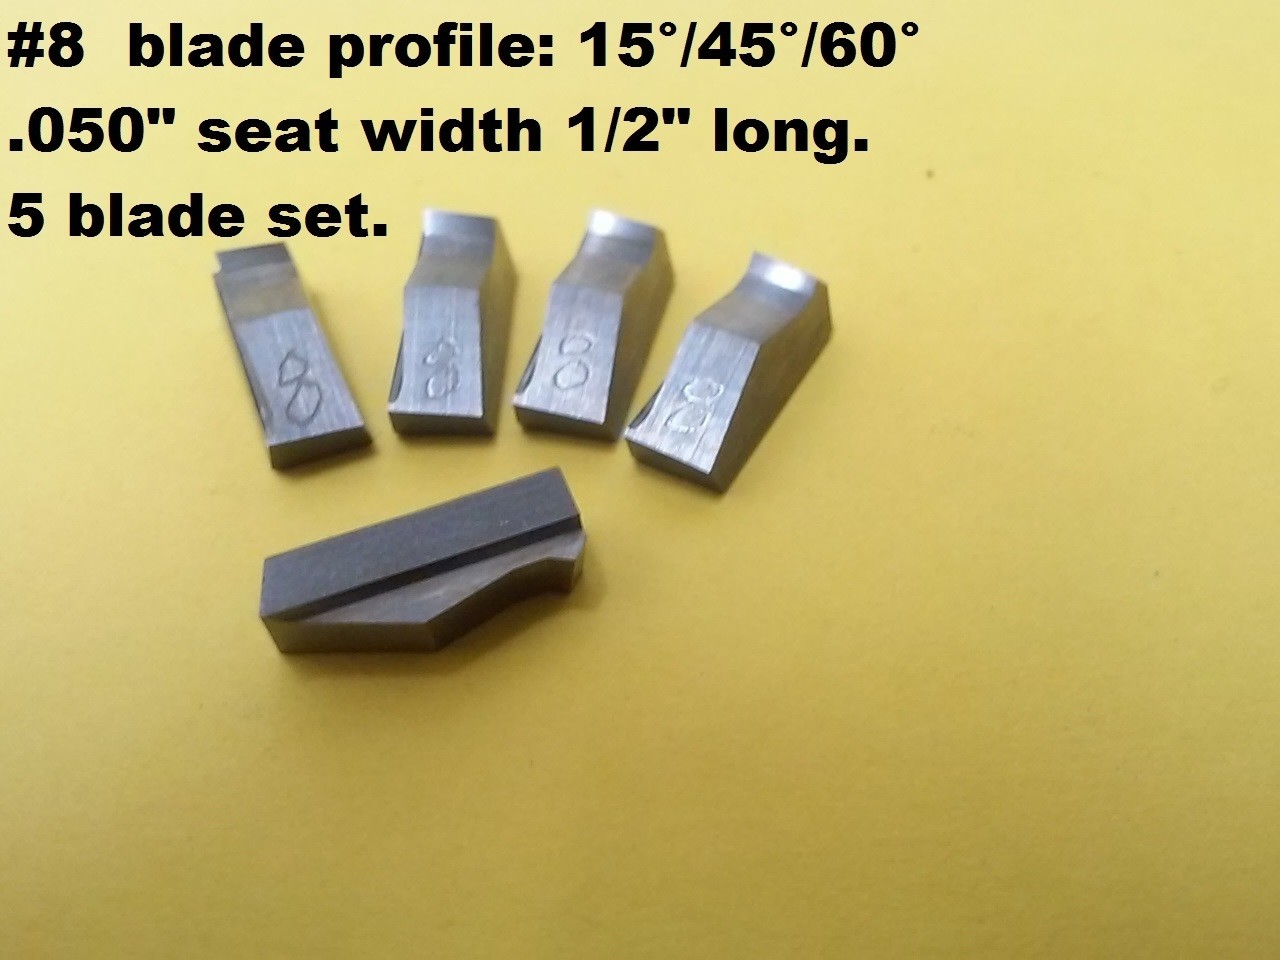 3 angle valve seat cutter blades #8 NEW profile:15°/45°60° X.050" seat 5 pack,